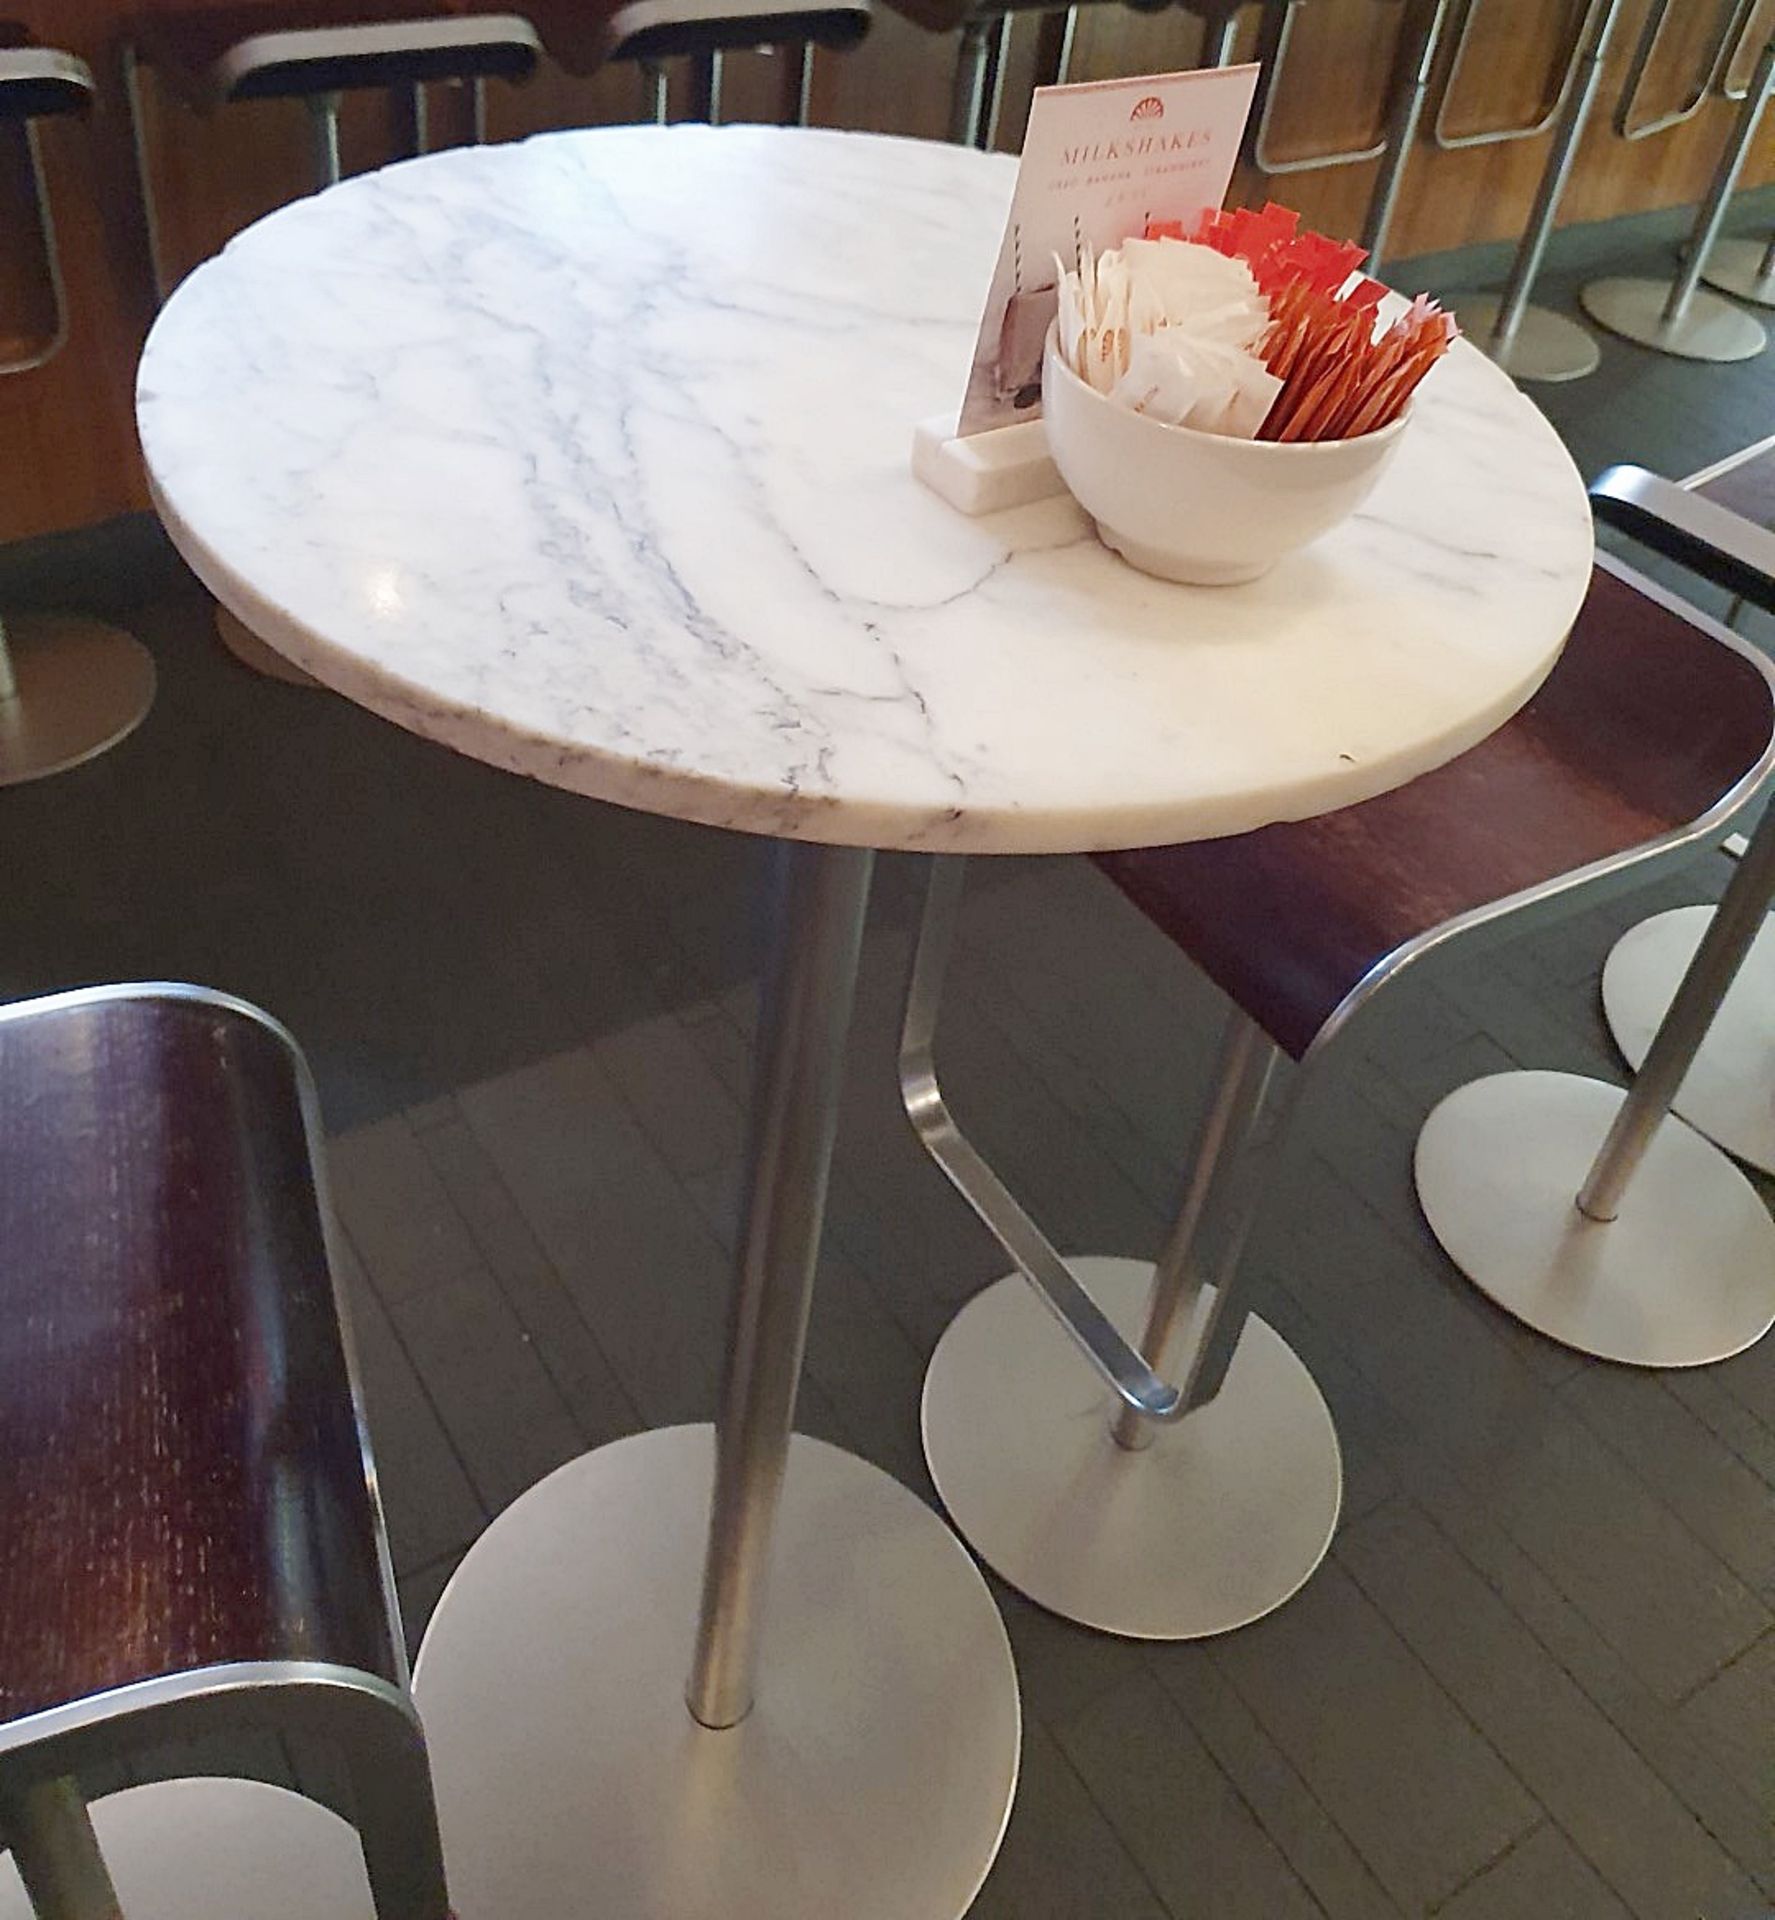 1 x Tall Round Marble/Granite Cocktail Bar Table - Dimensions: Diameter 60cm x Height 111cm - Ref: - Image 4 of 6